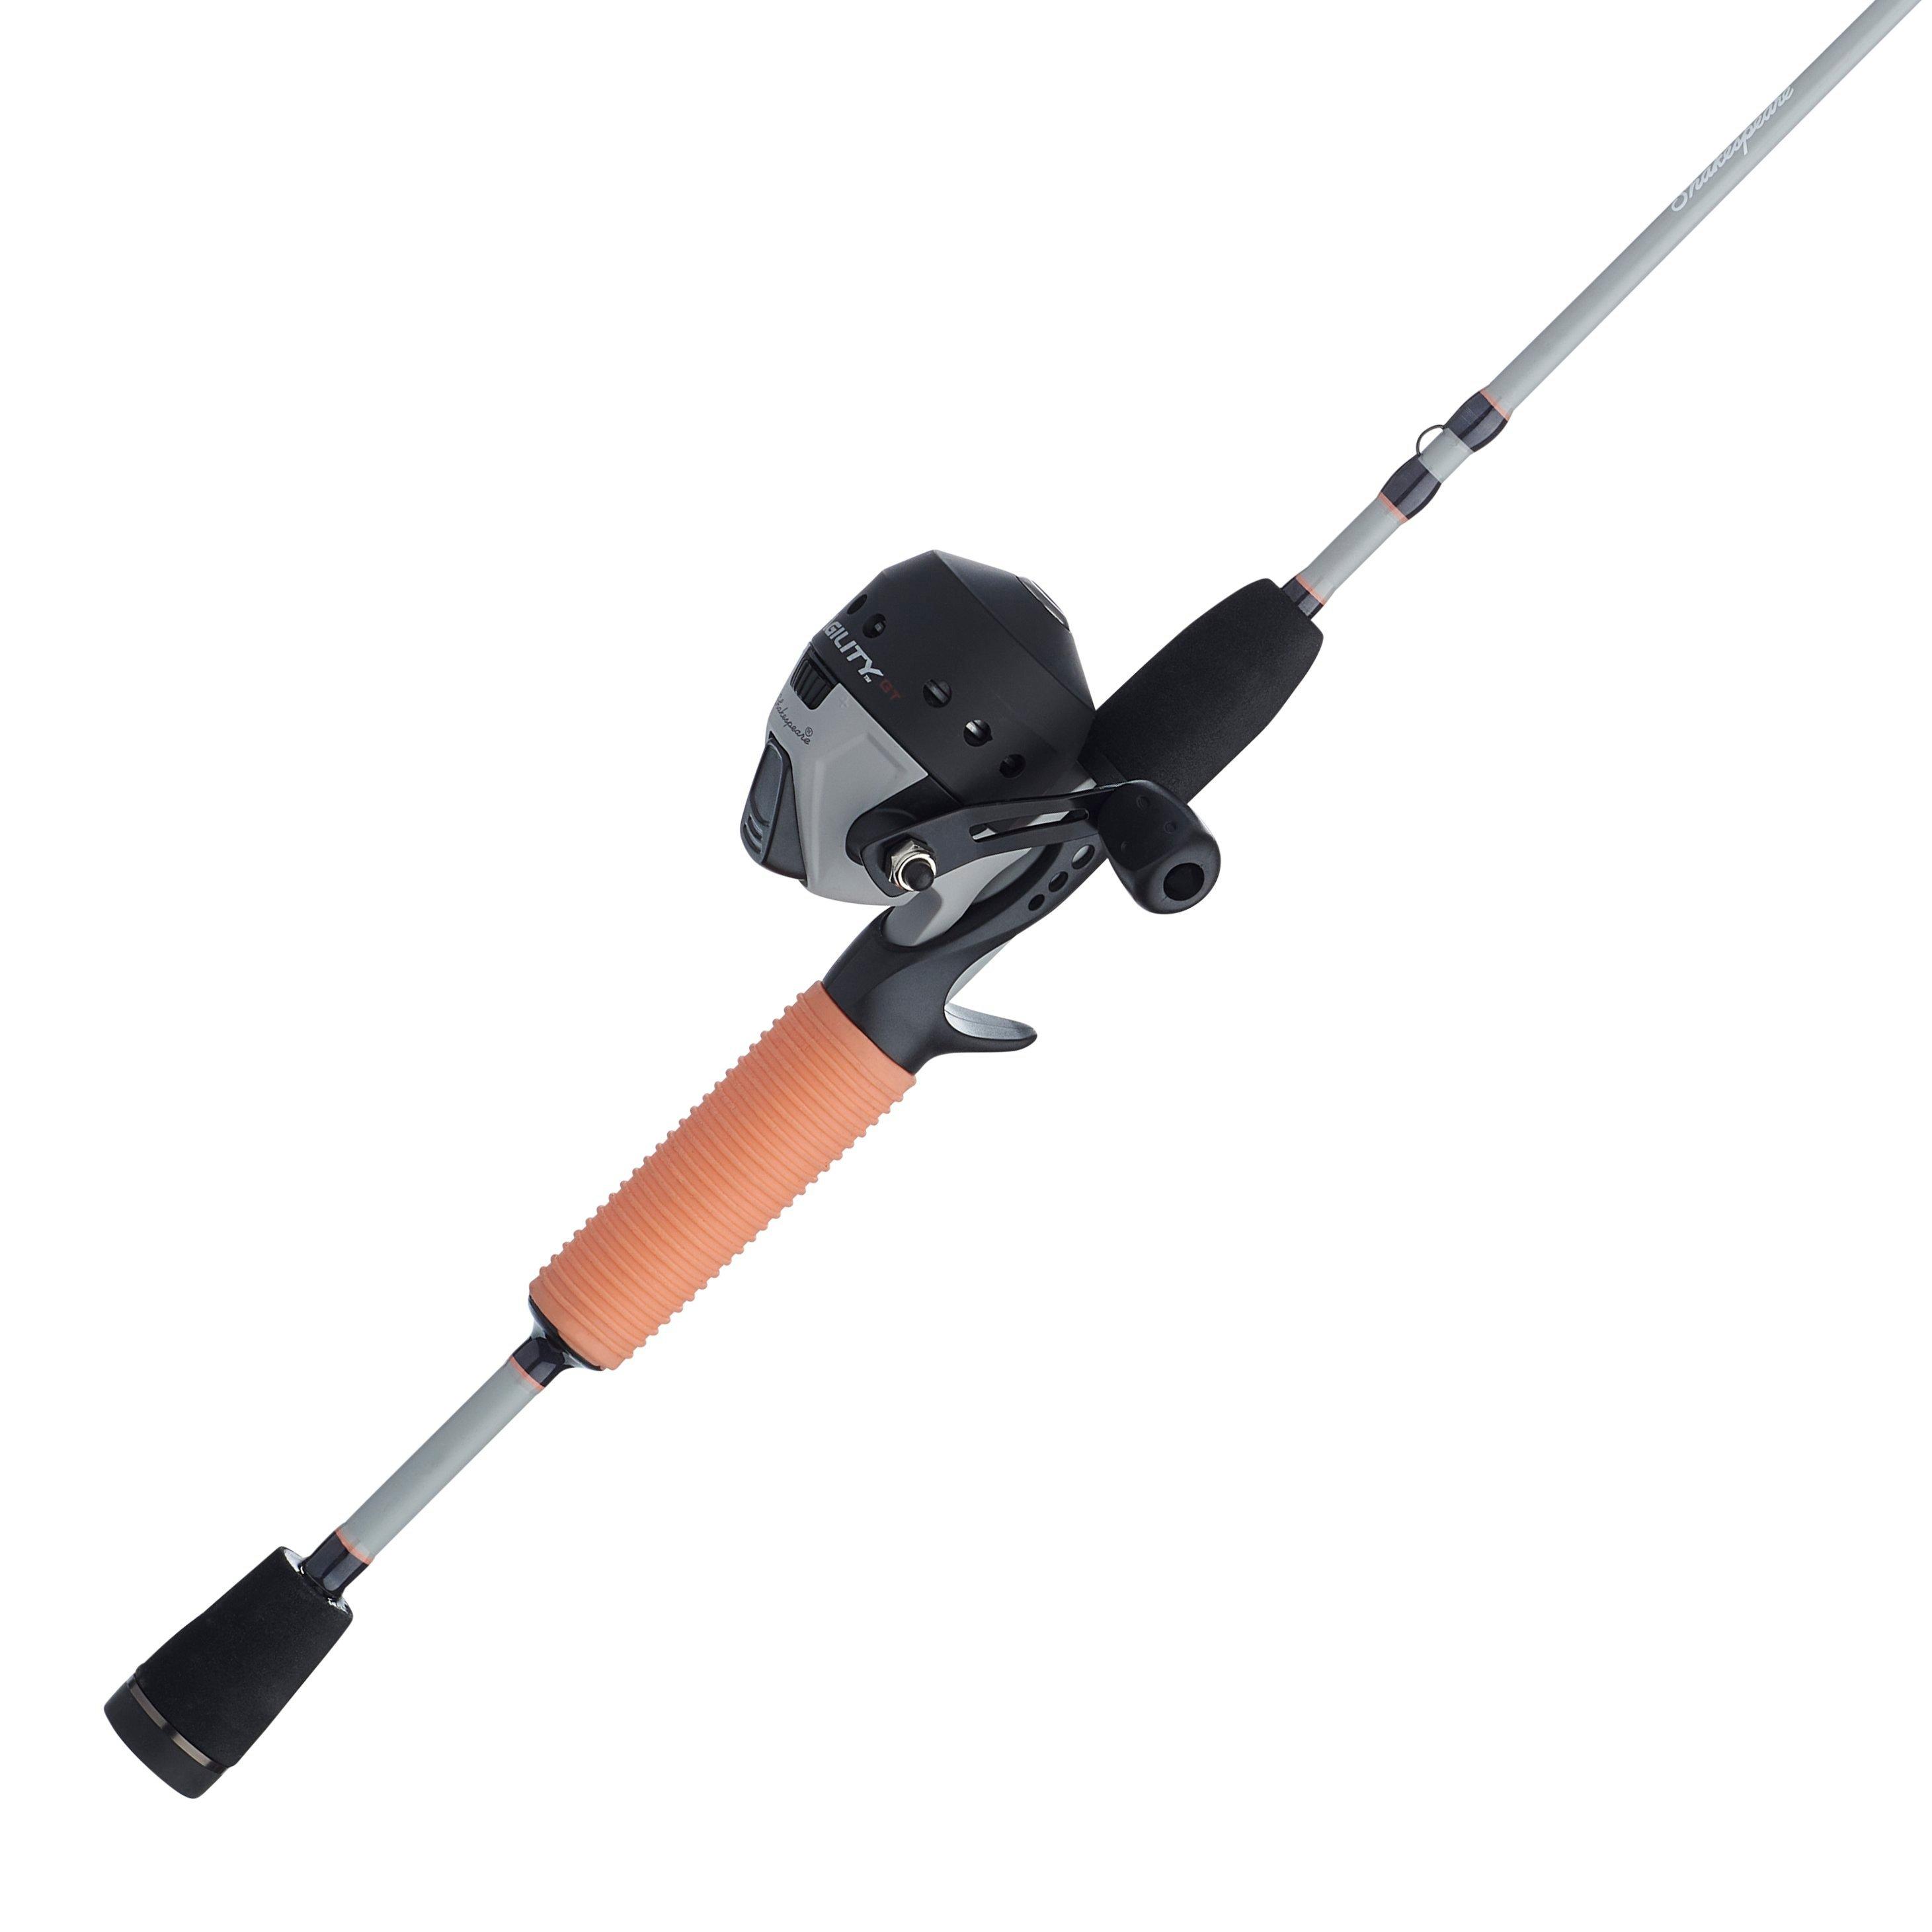 Shakespeare Lady Agility Gel-Tech Spincast Rod & Reel Combo LAGGT6/562M ,  $2.00 Off with Free S&H — CampSaver